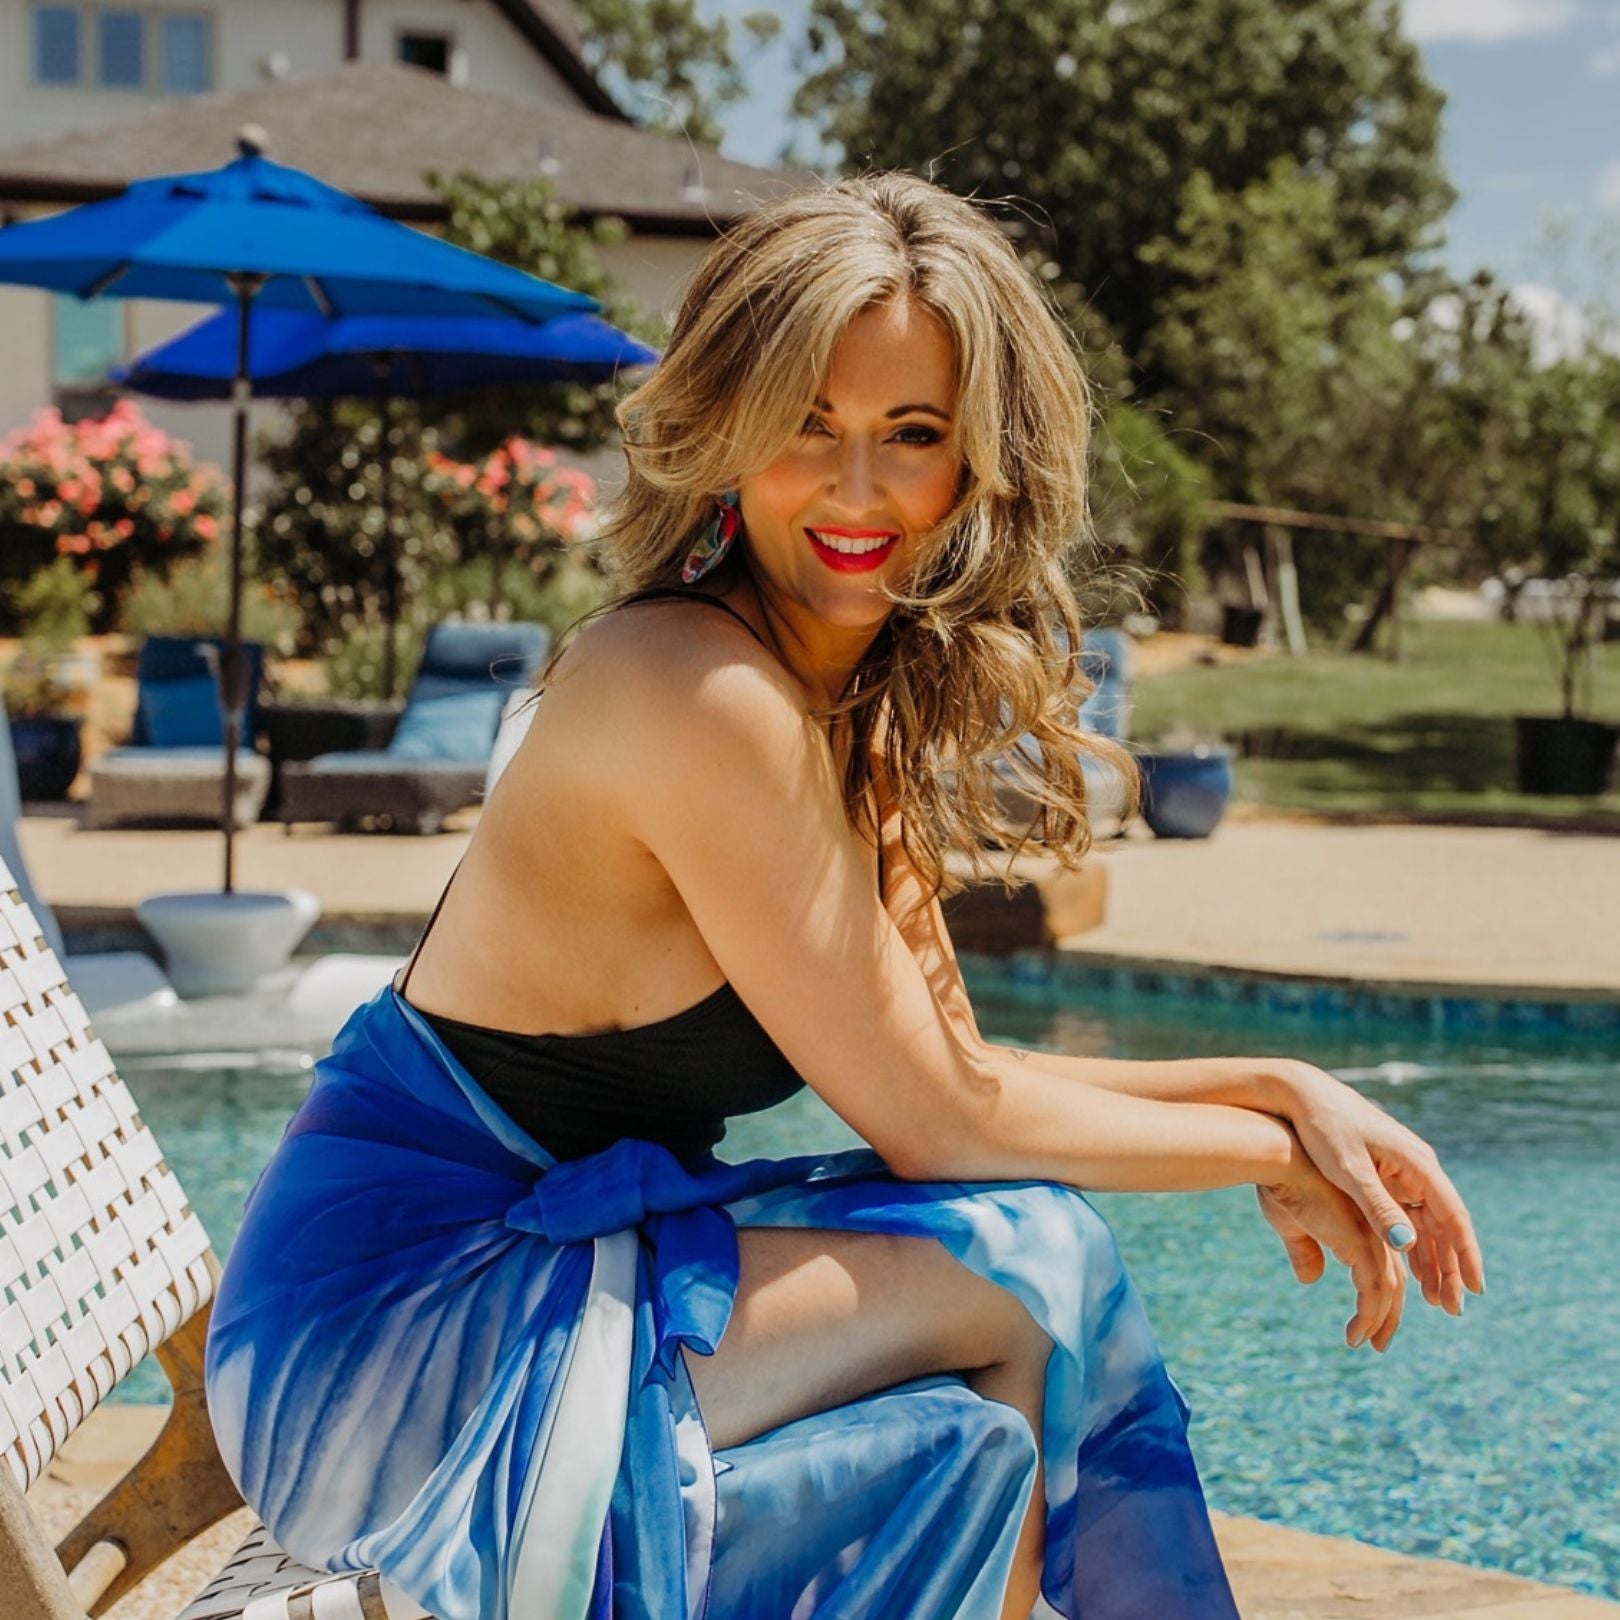 Model next to pool - Hair and makeup services in DFW